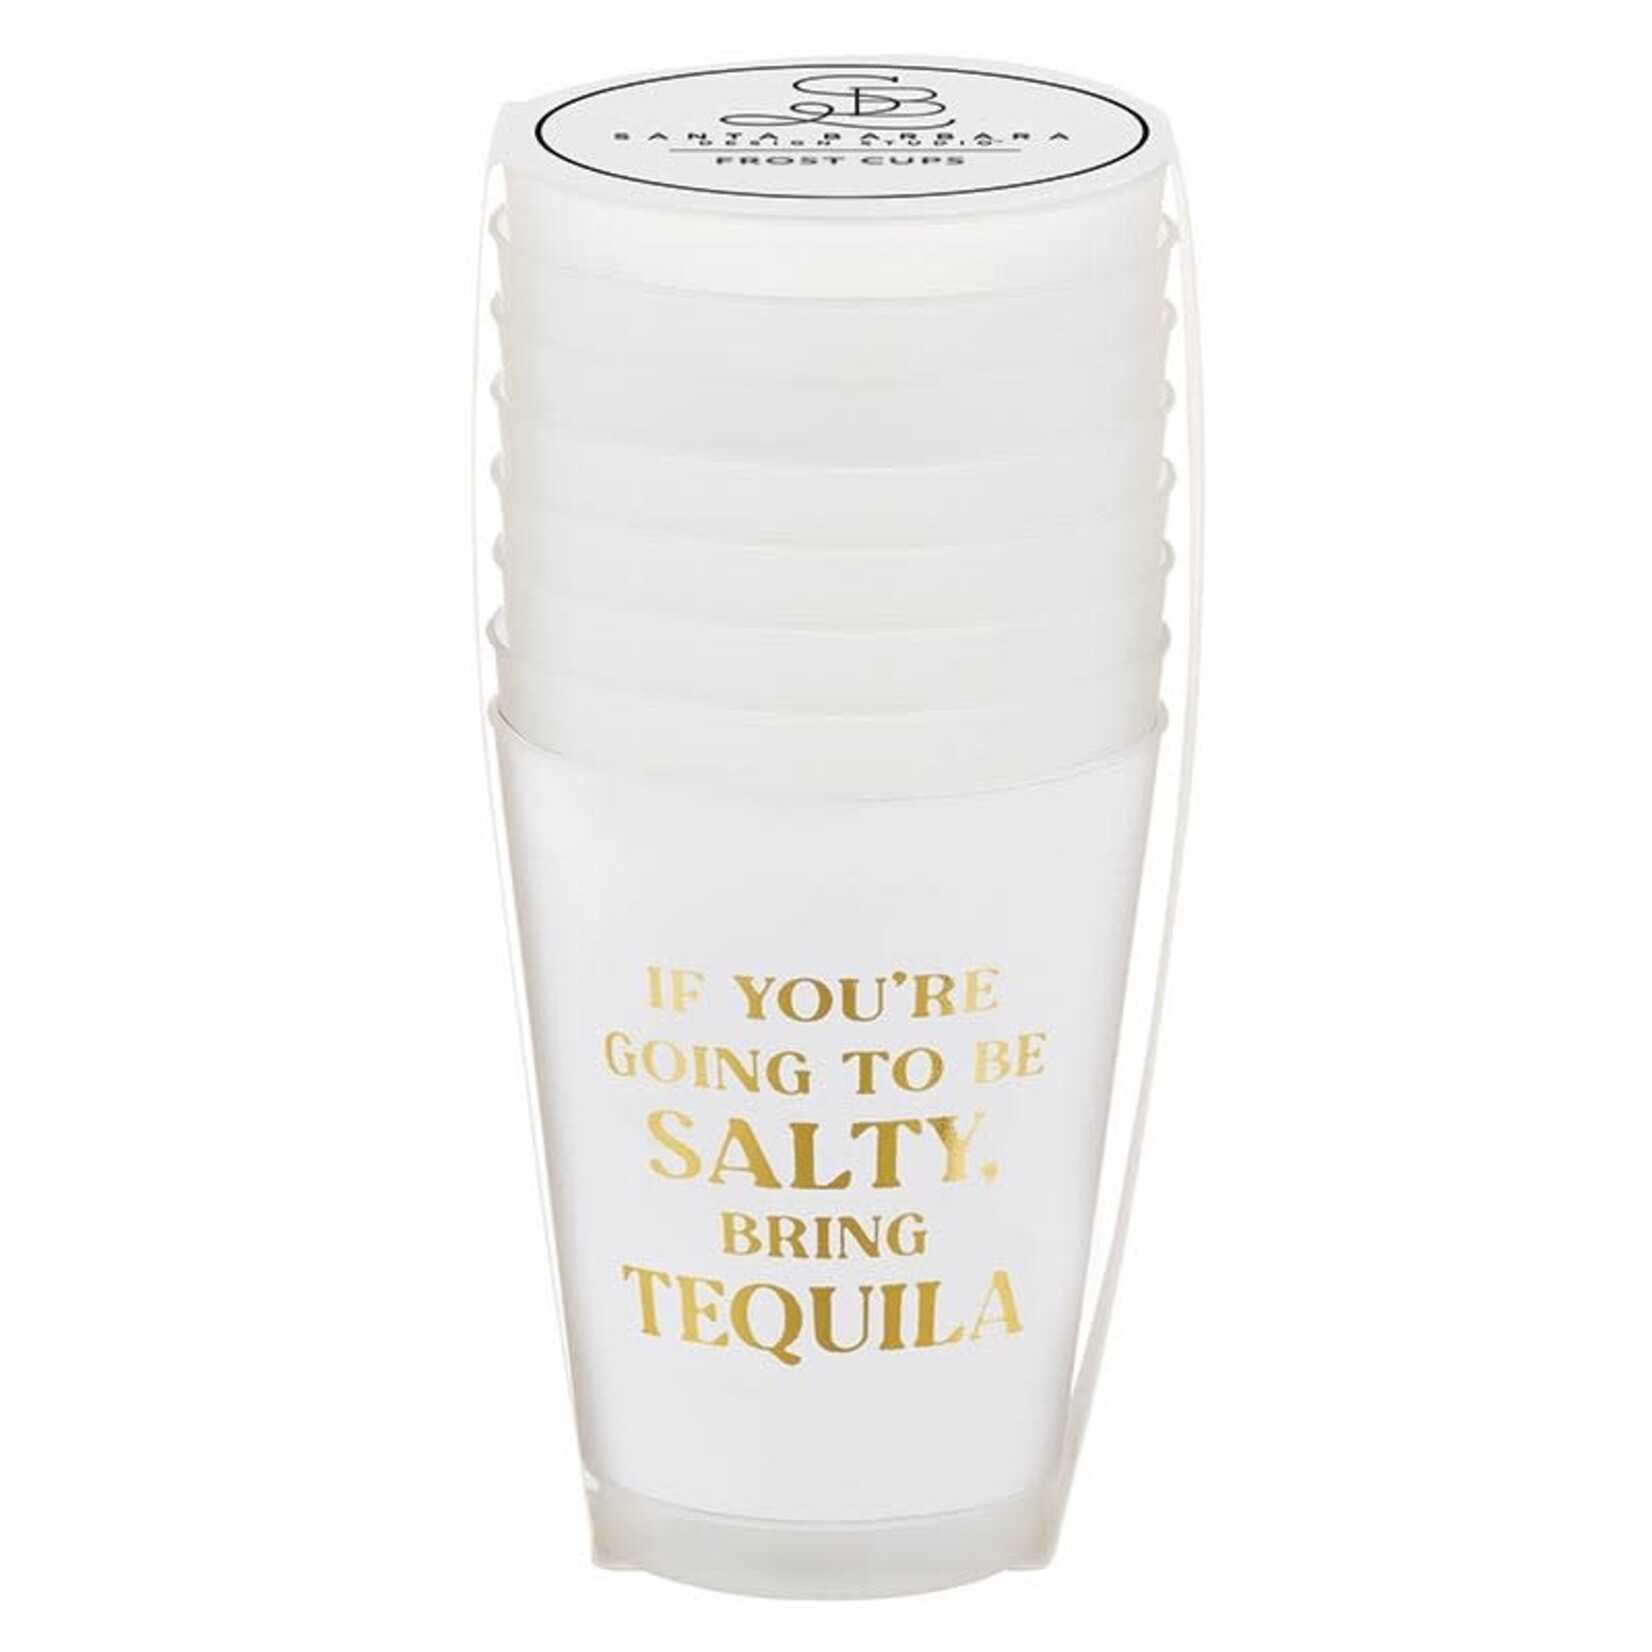 Gold Foil Frost Cup - Bring Tequila 6pk